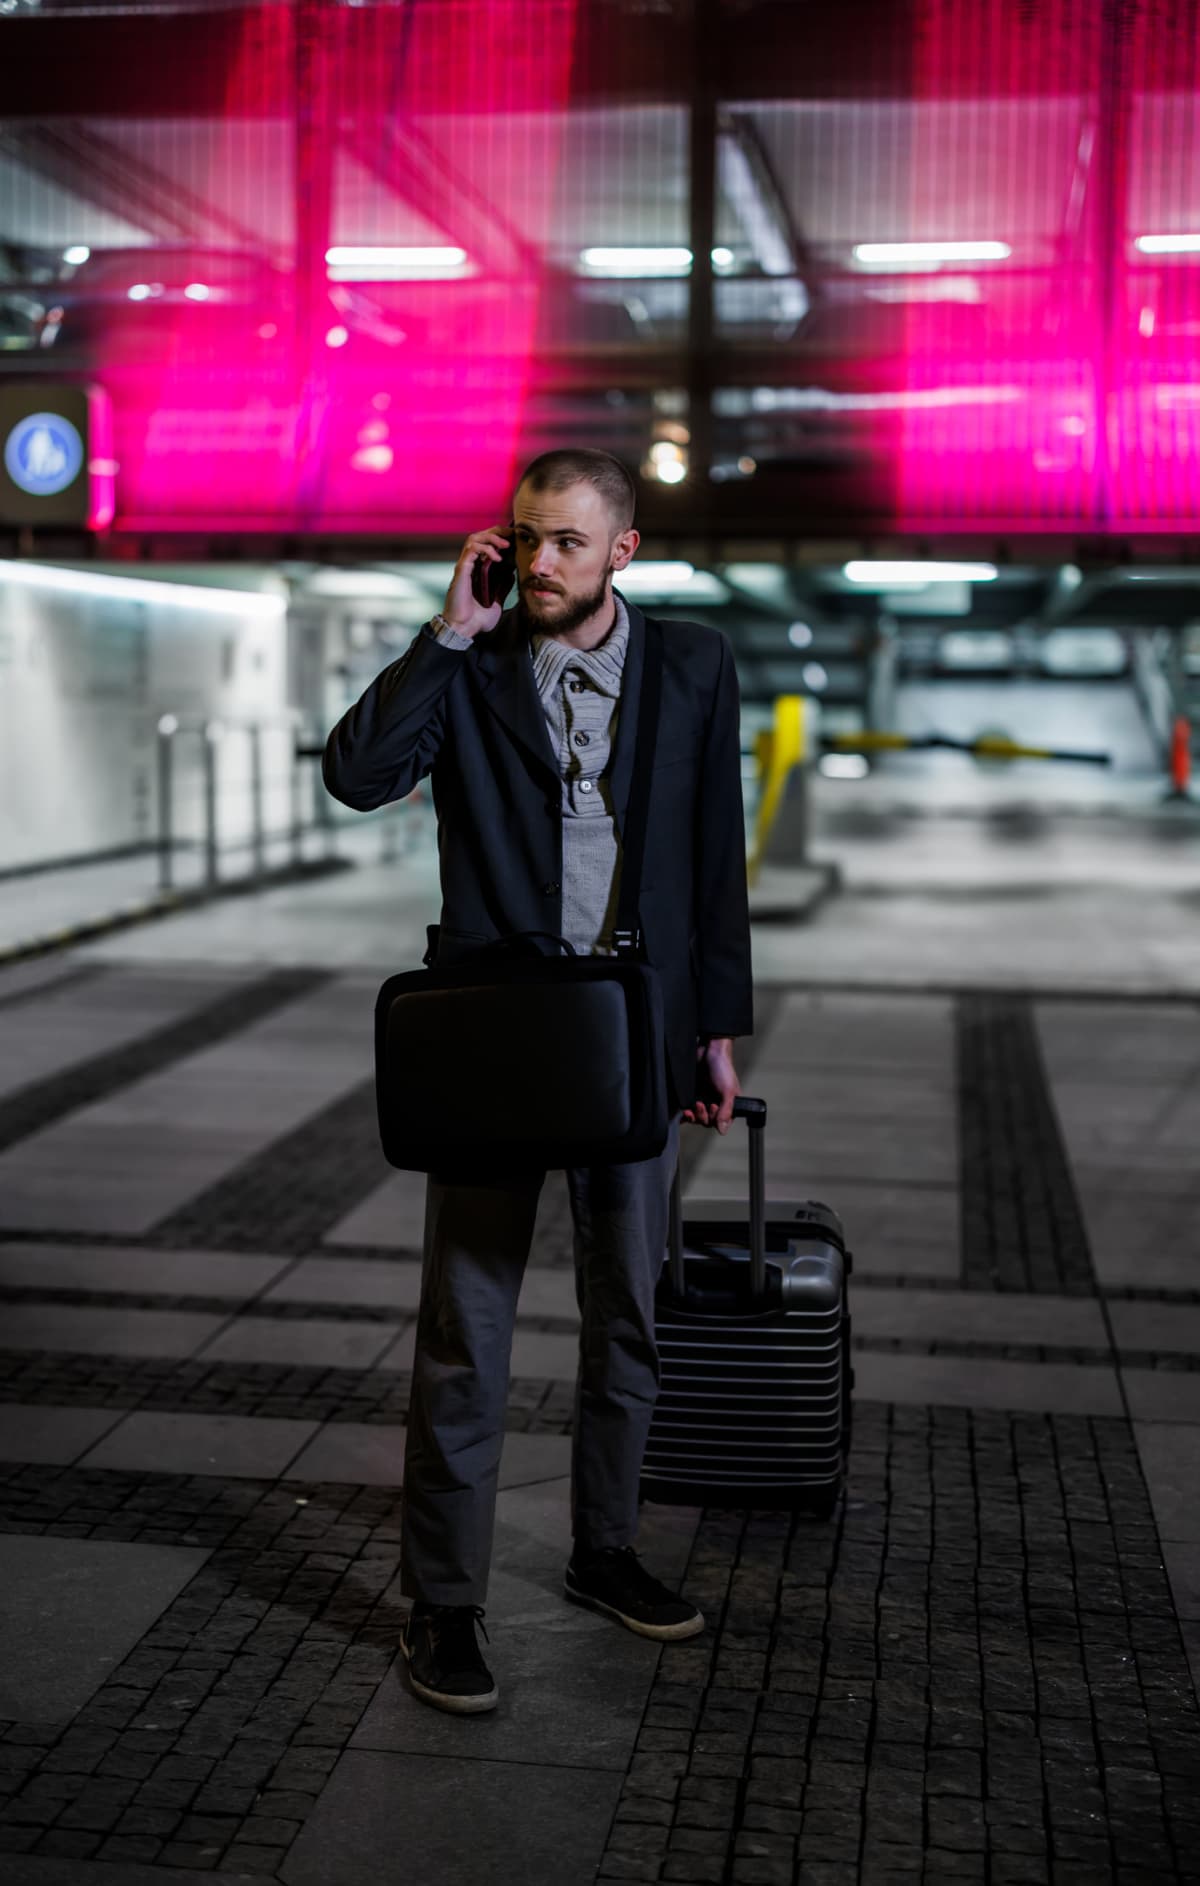 As a young businessman exits the airport with a suitcase, he is talking on a mobile phone.